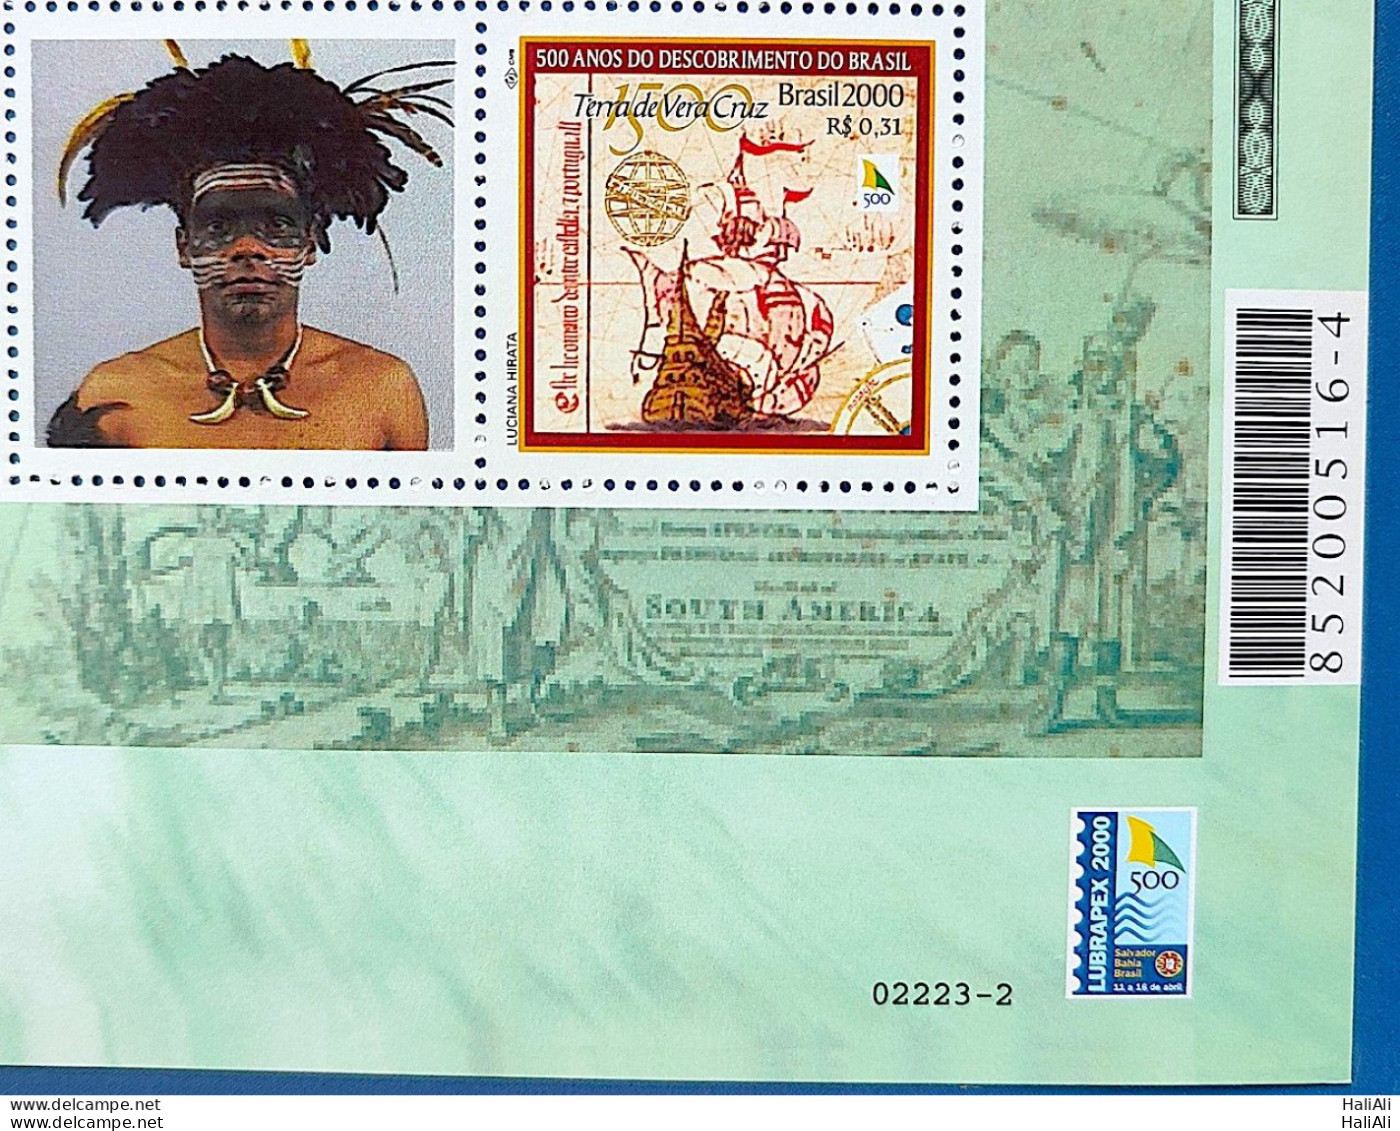 C 2254 Brazil Personalized Stamp Discovery Of Brazil Indian Ship Portugal 2000 Bar Code - Unused Stamps